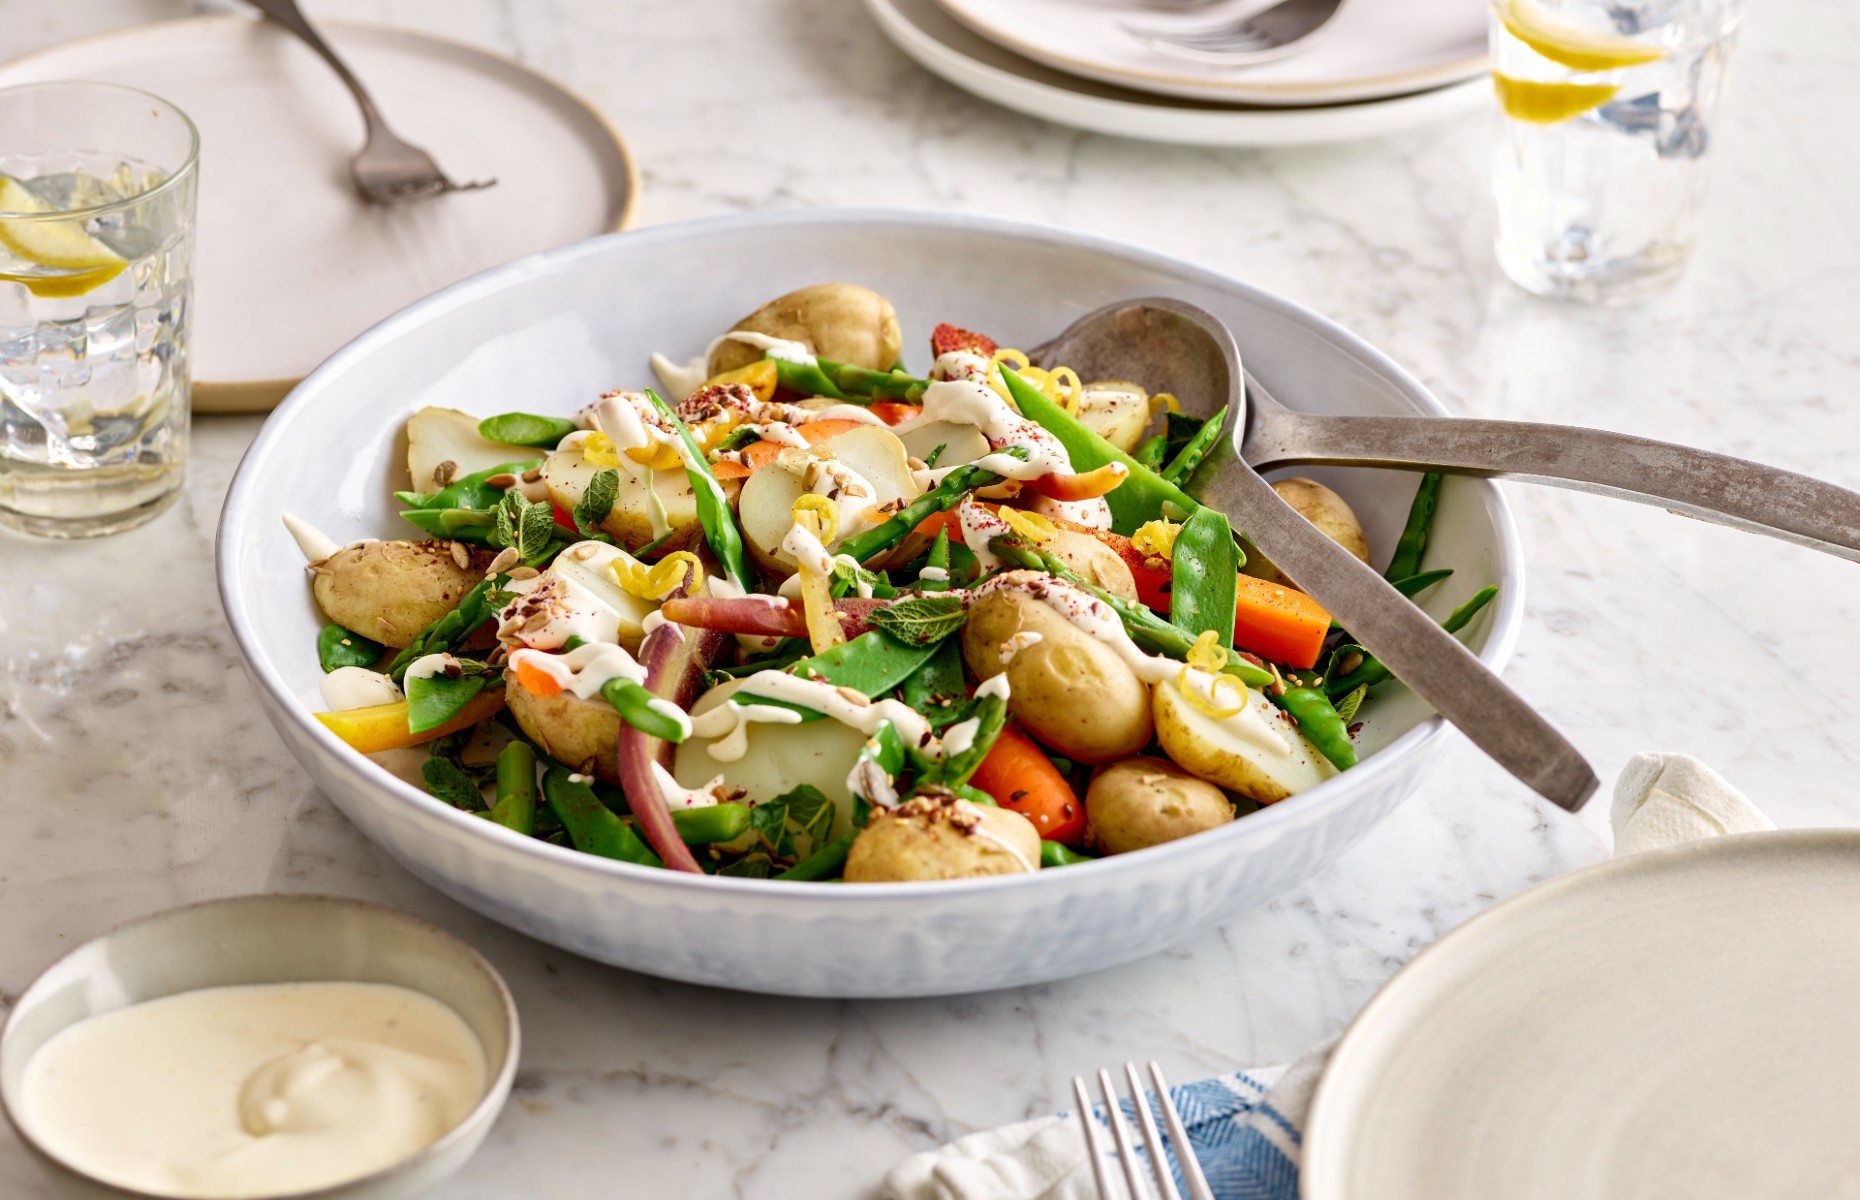 Jersey Royals Recipe With Chive Aioli